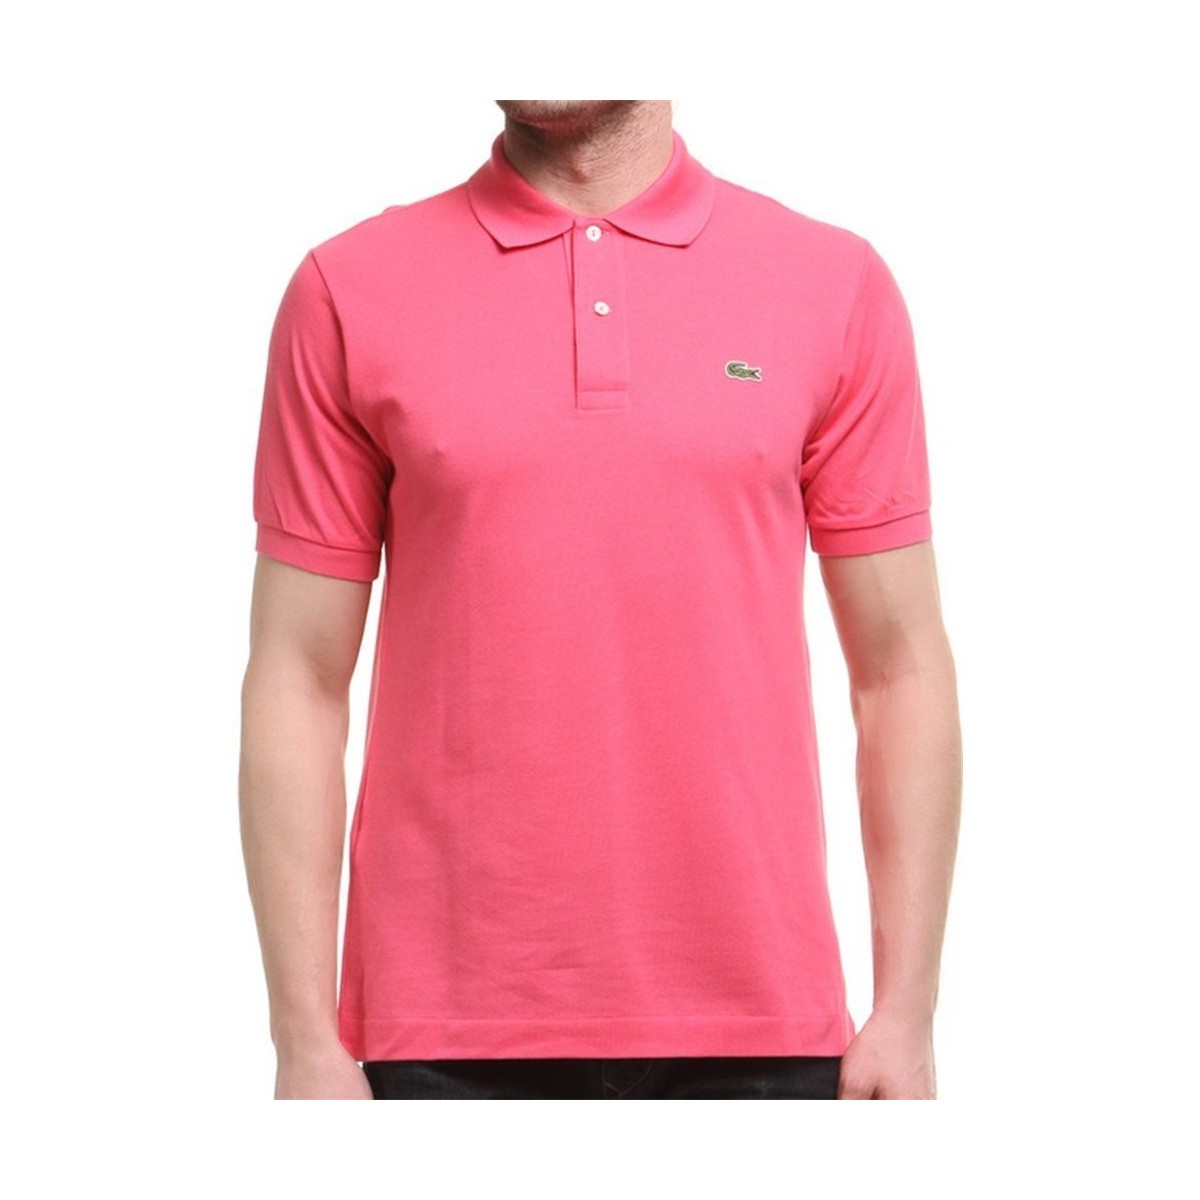 lacoste  l1212gmz  men's t shirt in pink